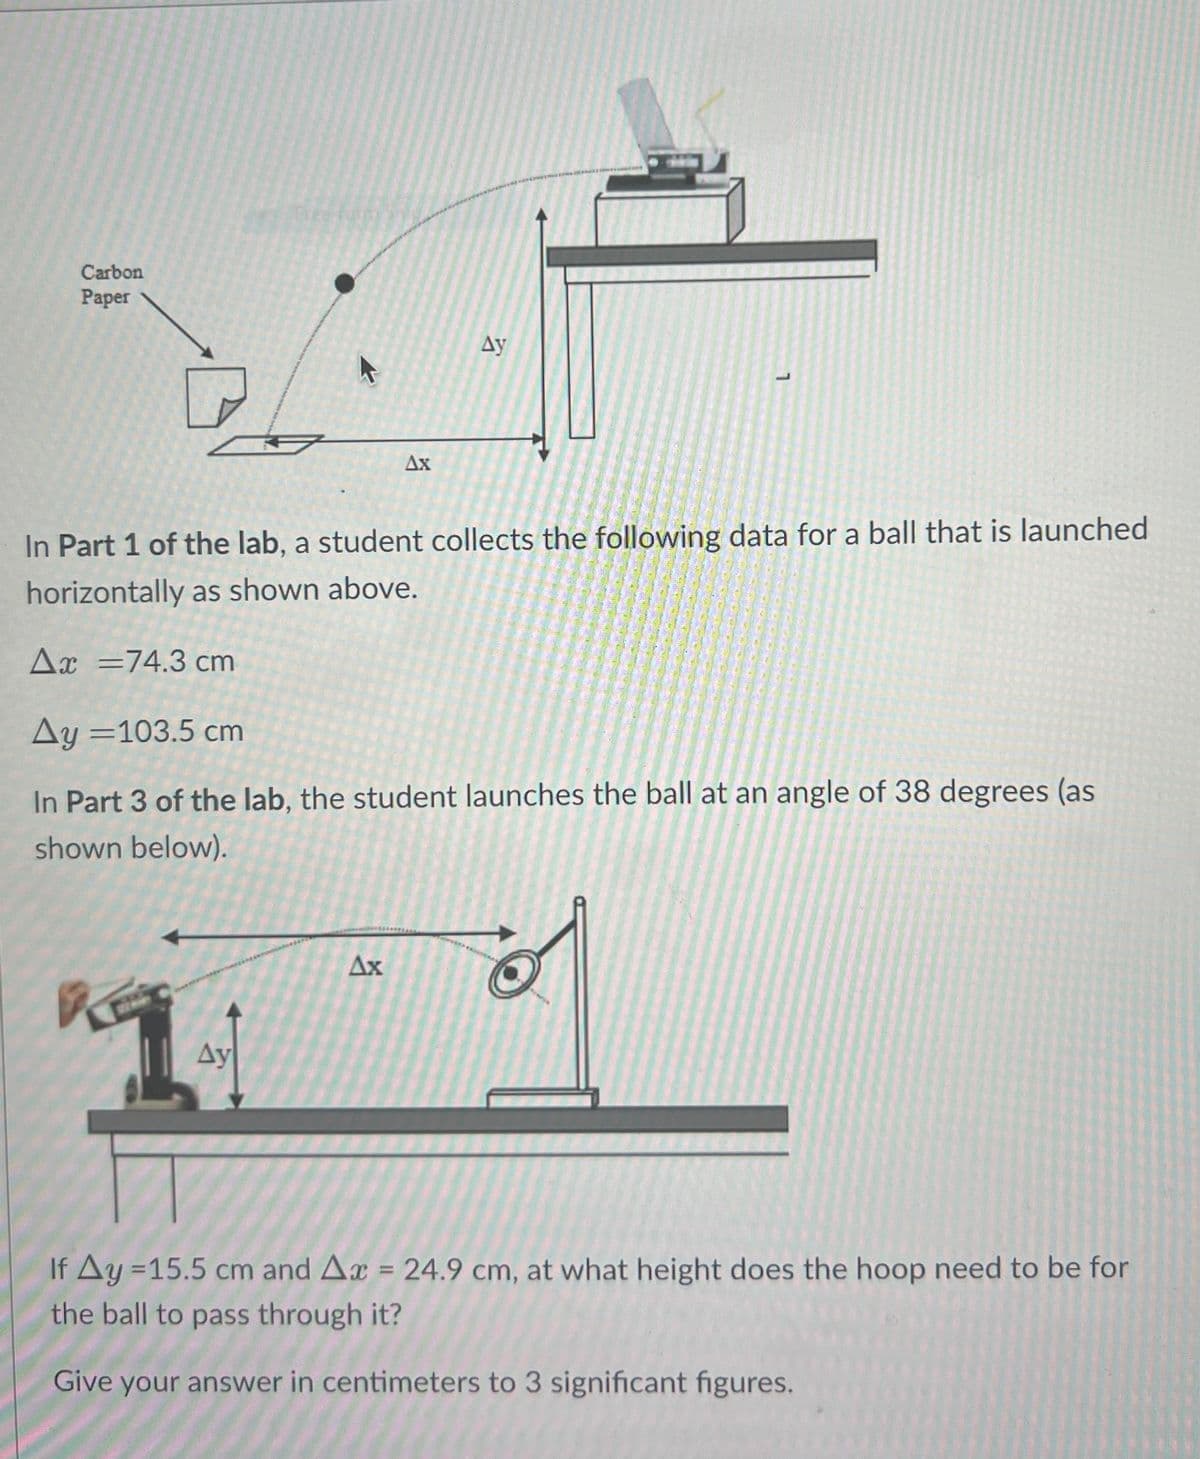 Carbon
Paper
Ay
Ax
In Part 1 of the lab, a student collects the following data for a ball that is launched
horizontally as shown above.
Ax=74.3 cm
Ay=103.5 cm
In Part 3 of the lab, the student launches the ball at an angle of 38 degrees (as
shown below).
Ax
Ay
If Ay=15.5 cm and Ax = 24.9 cm, at what height does the hoop need to be for
the ball to pass through it?
Give your answer in centimeters to 3 significant figures.